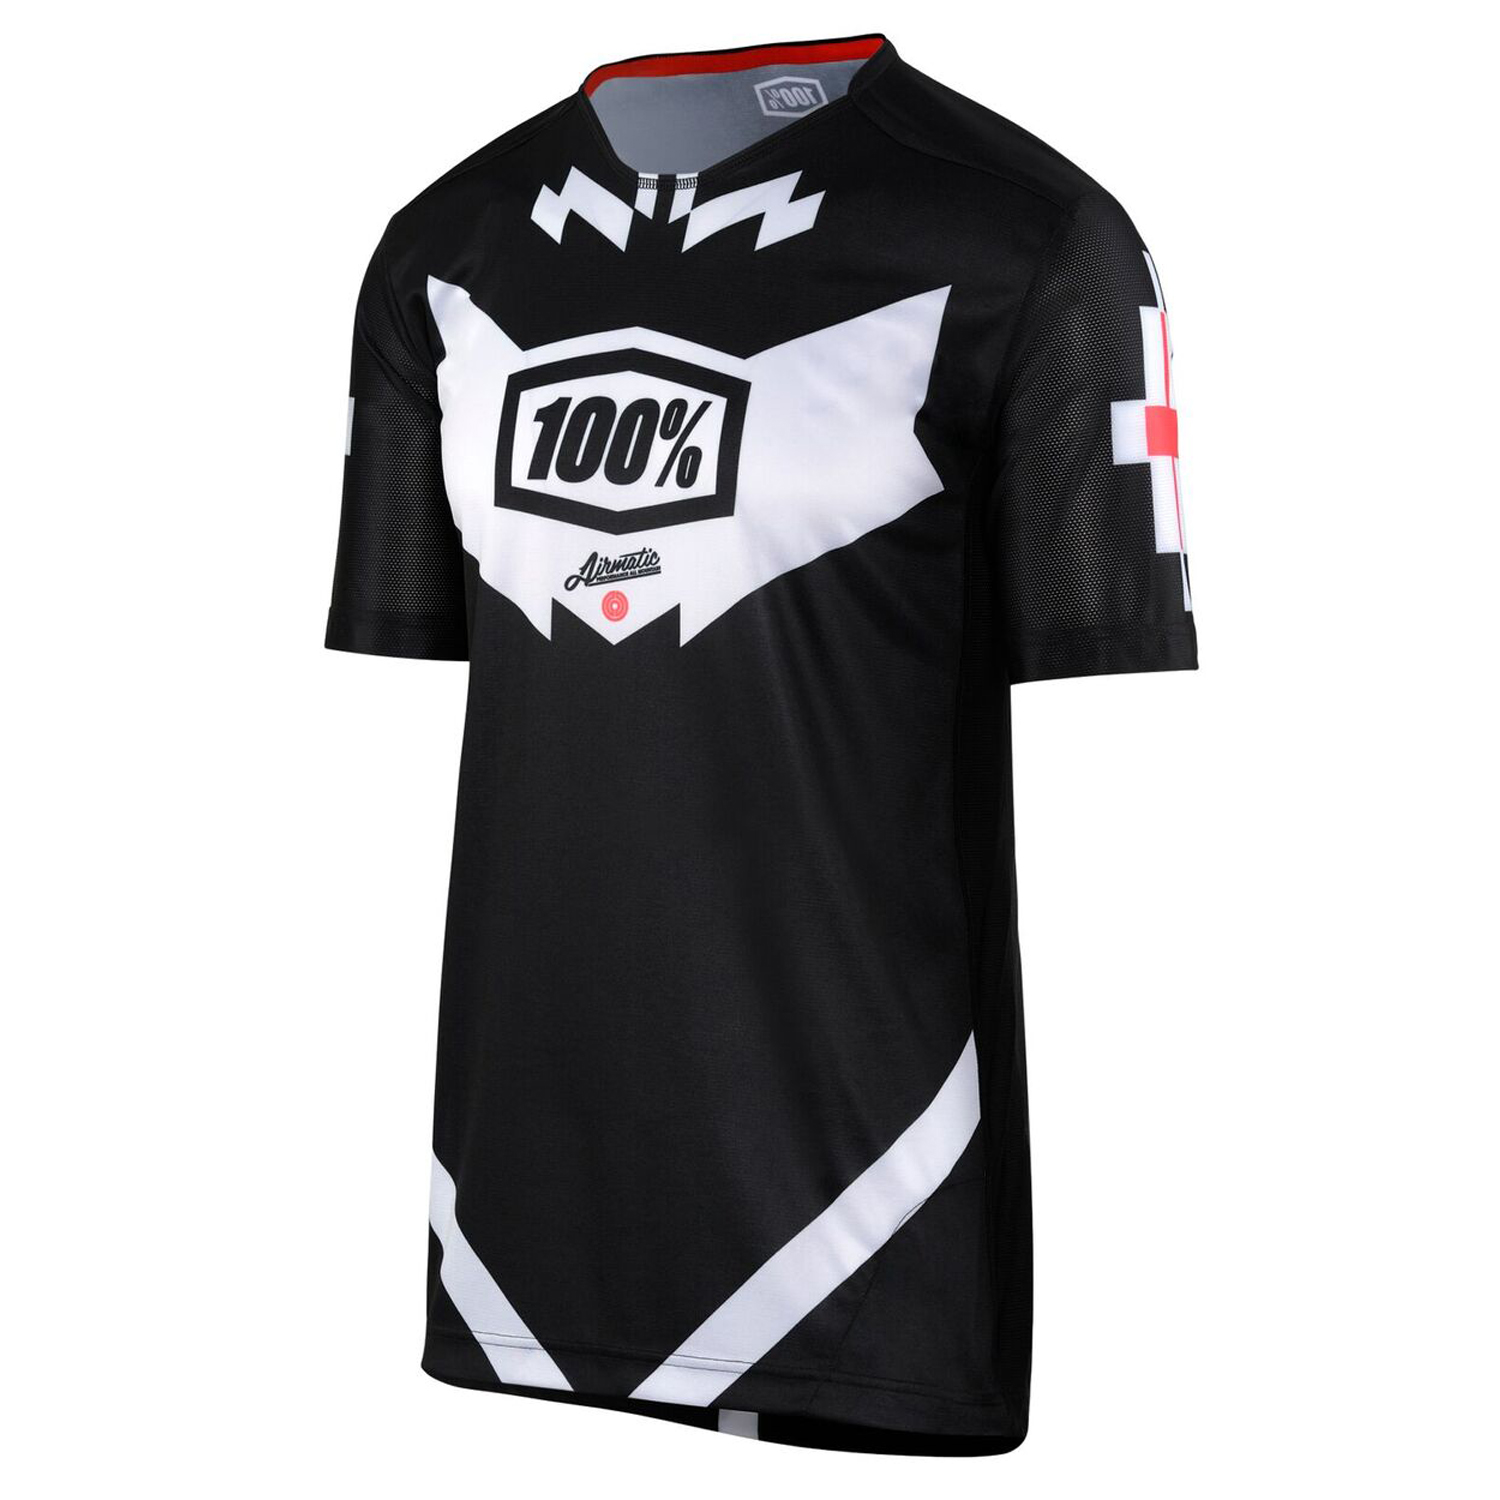 100% Maillot VTT Manches Courtes Airmatic Jeronimo Black